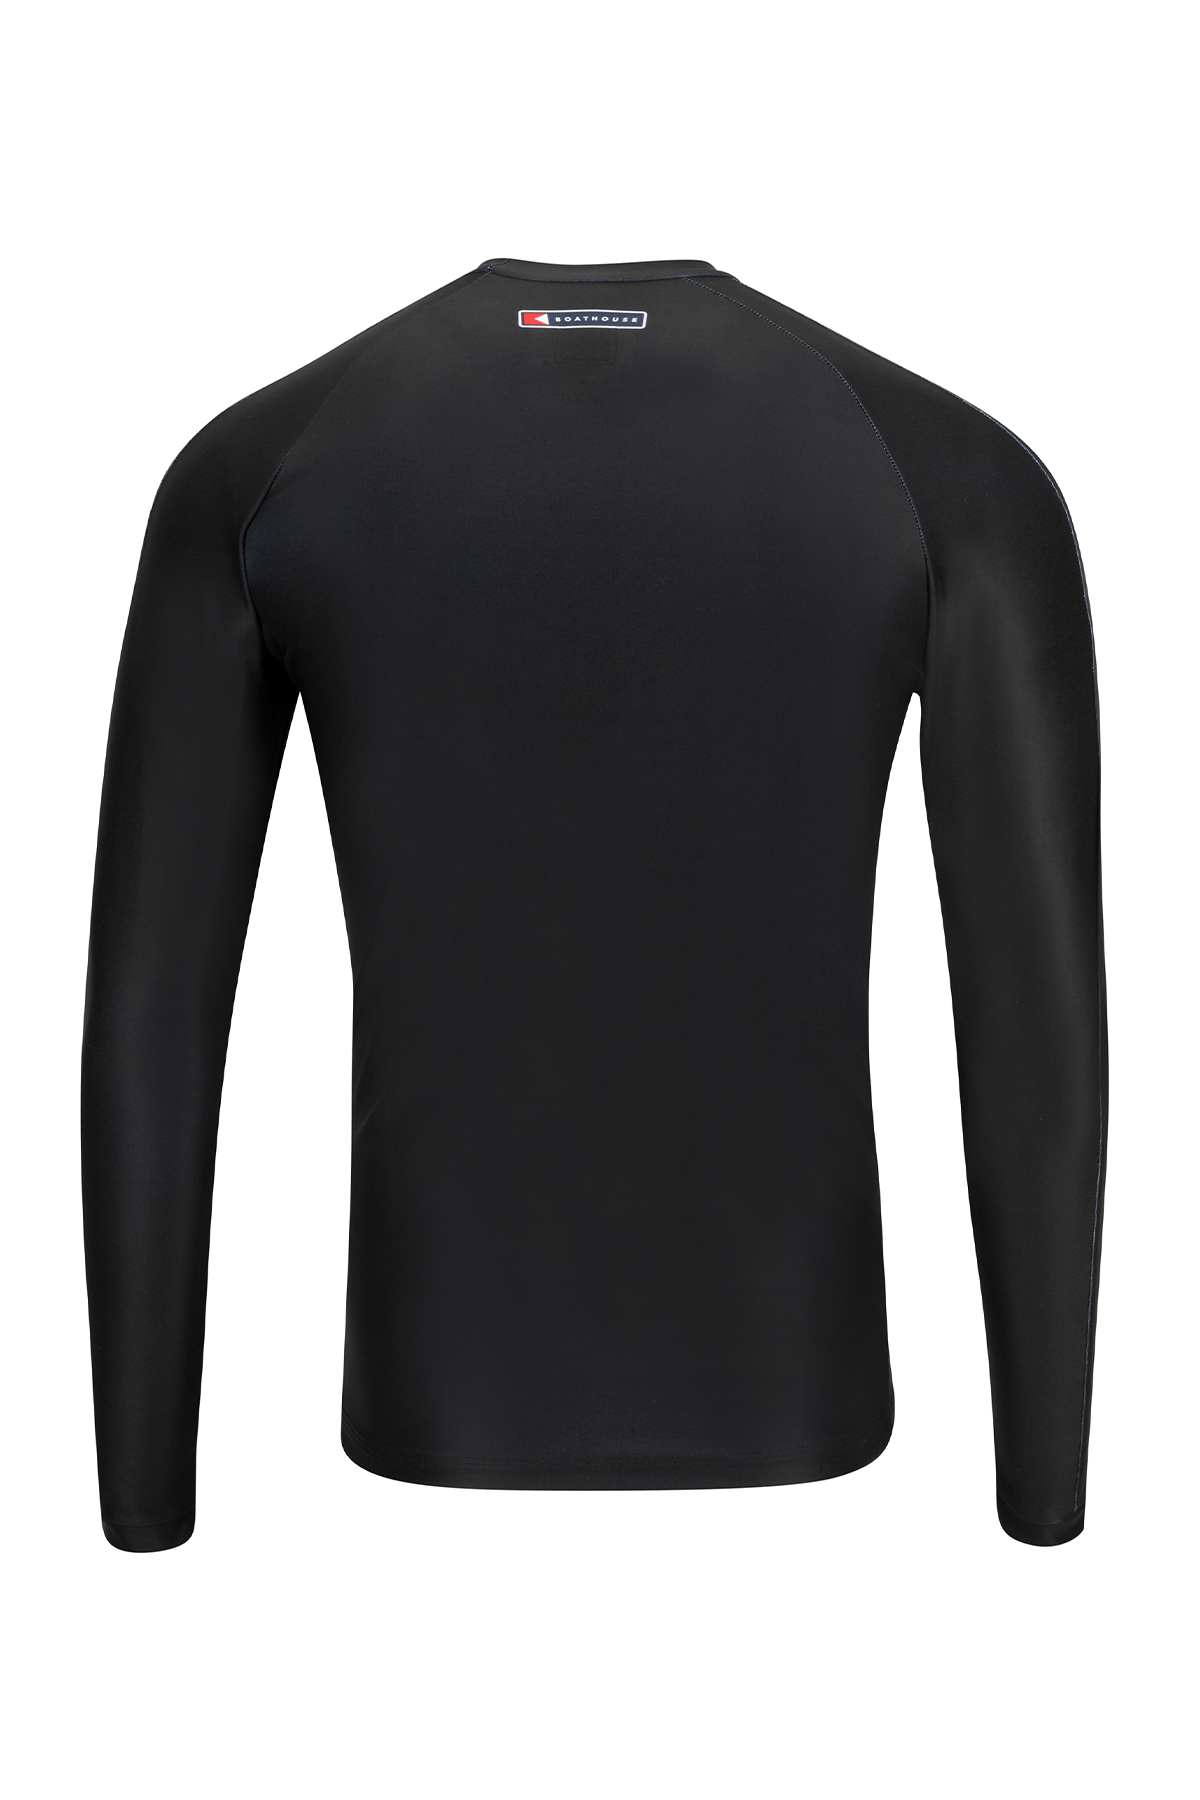 Men's Signature Boathouse Row Long Sleeve Compression Top